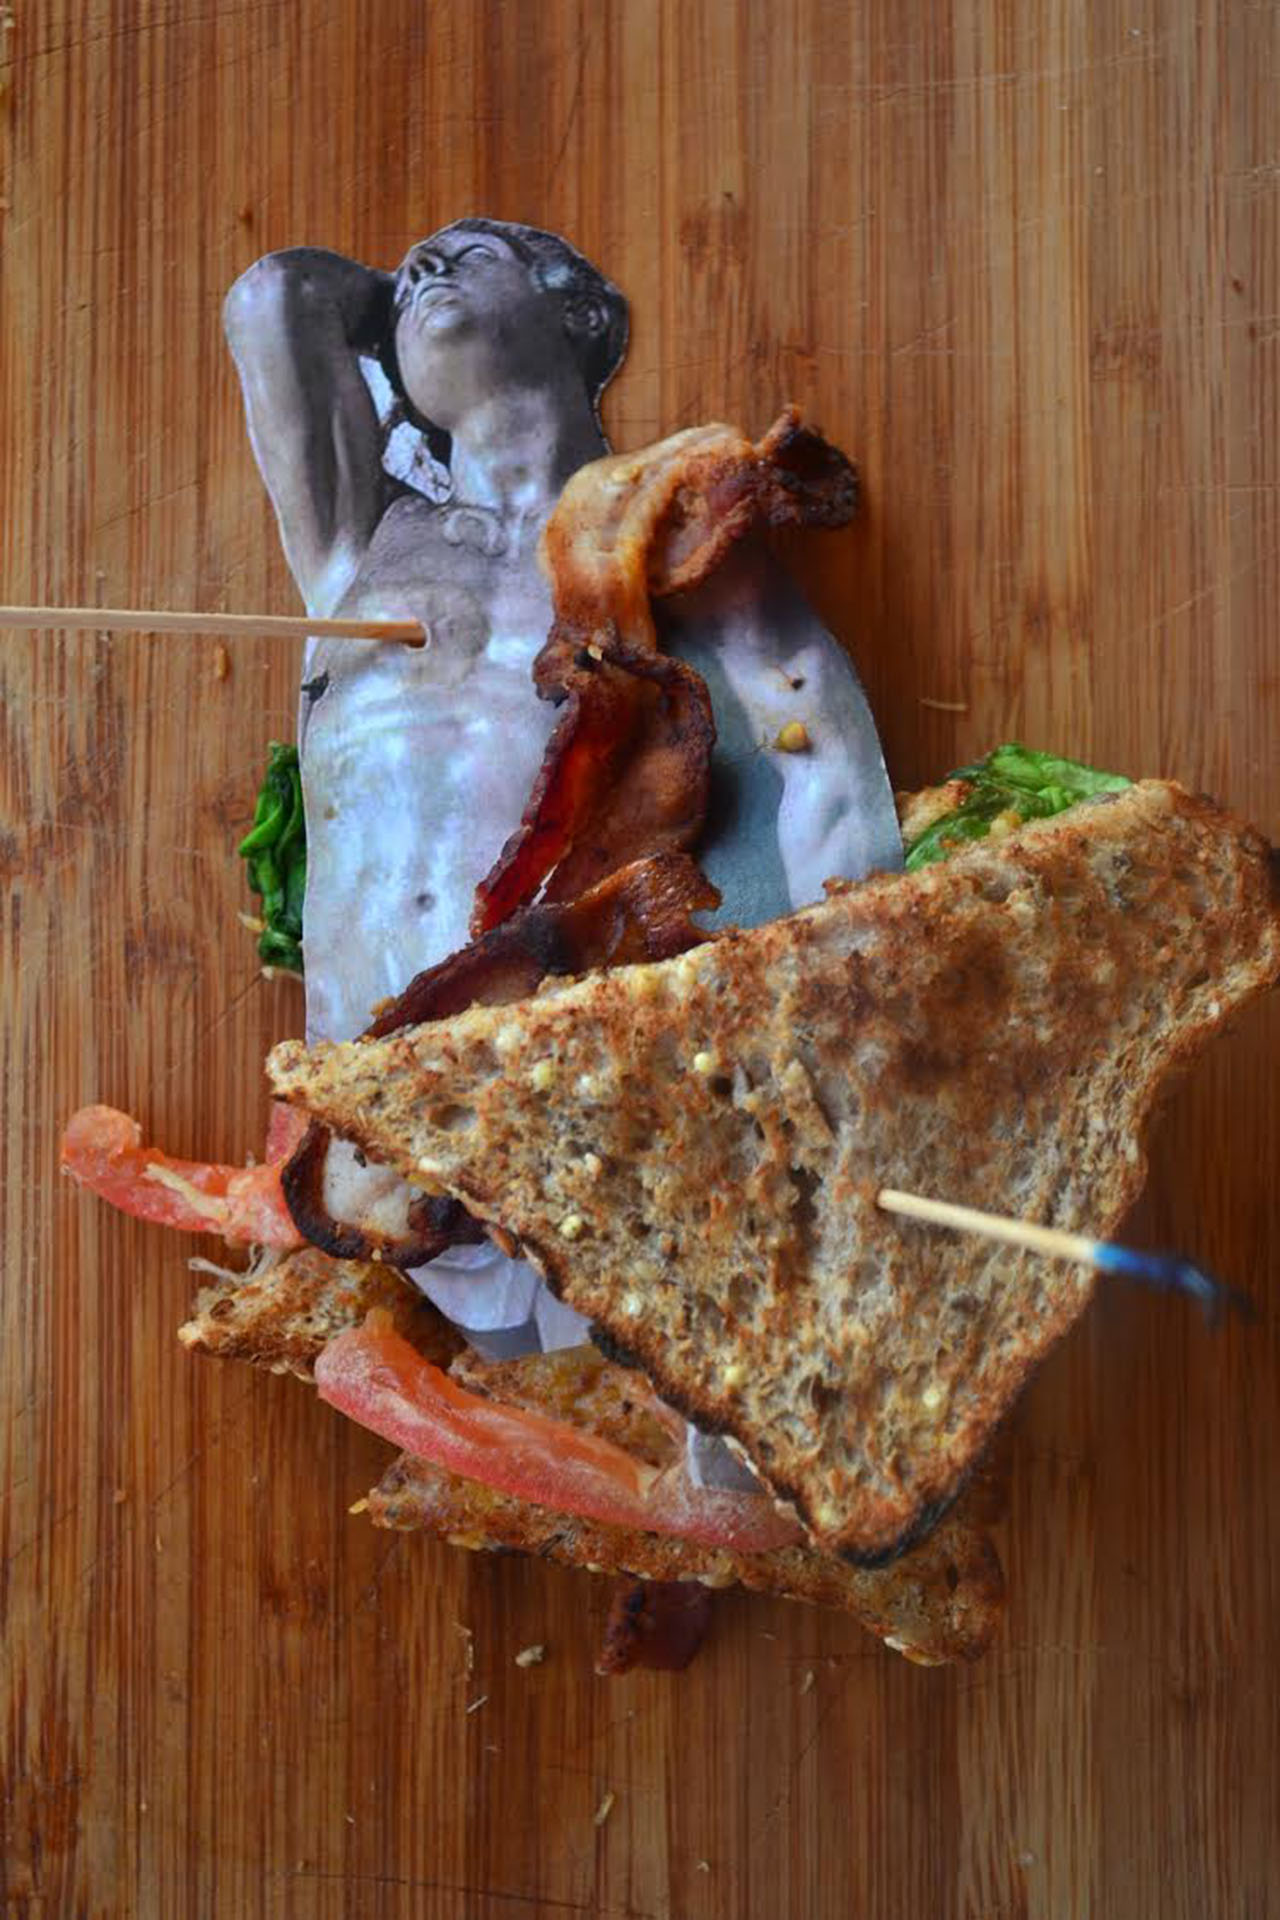 APRIL 2015: Alumni, teaching artists, and teen photography students exhibited their work at Remington Gallery during Capture Photography Festival, showing the reach of Arts Umbrella’s 35-years-and-growing legacy. Works included this piece, by artist Jason Wright. It's called: Tragedy of open faced St. Sebastians or The Sacrifice of Artisanal Sandwiches for the Redemption of the Ethical Glutton.